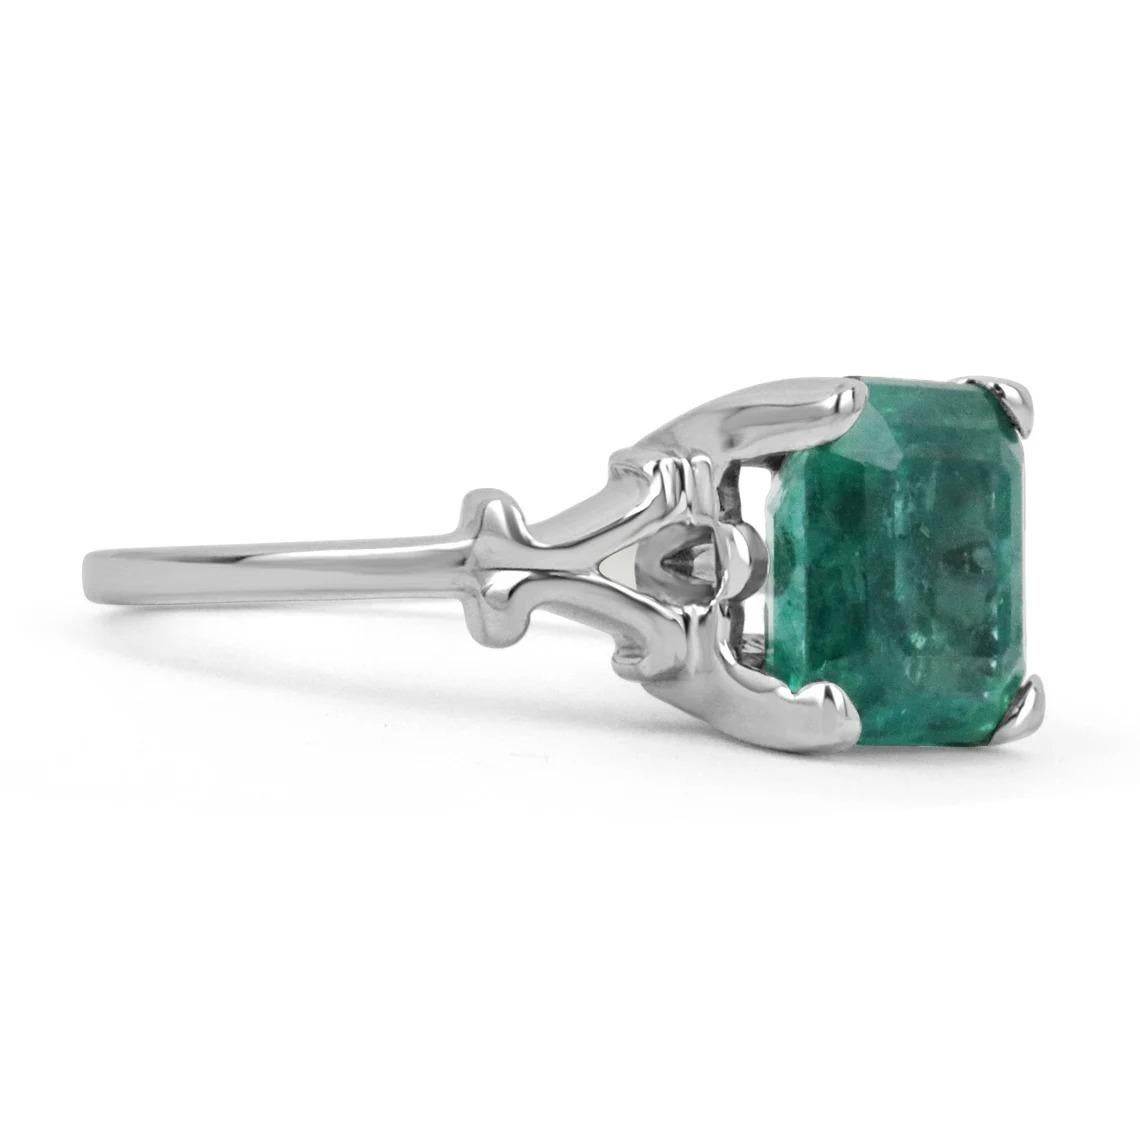 Featured is a remarkable, emerald solitaire ring. The featured gem carries an impressive 3.25-carat, Asscher-cut Zambian emerald with stunning characteristics. Set in a unique four-prong, solitaire 14K white gold setting.

Setting Style: